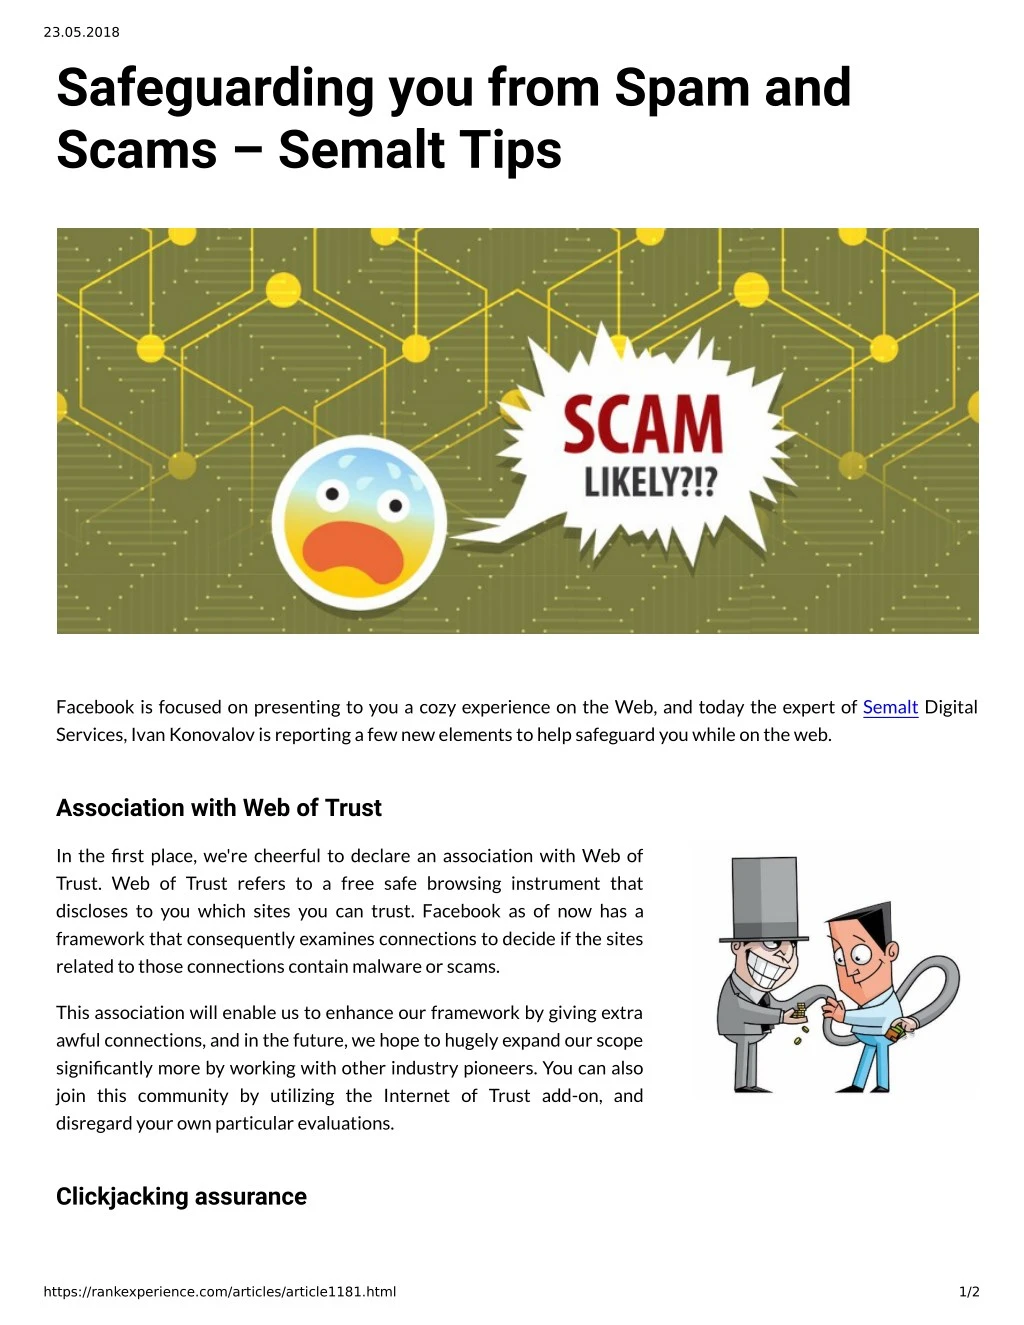 23 05 2018 safeguarding you from spam and scams